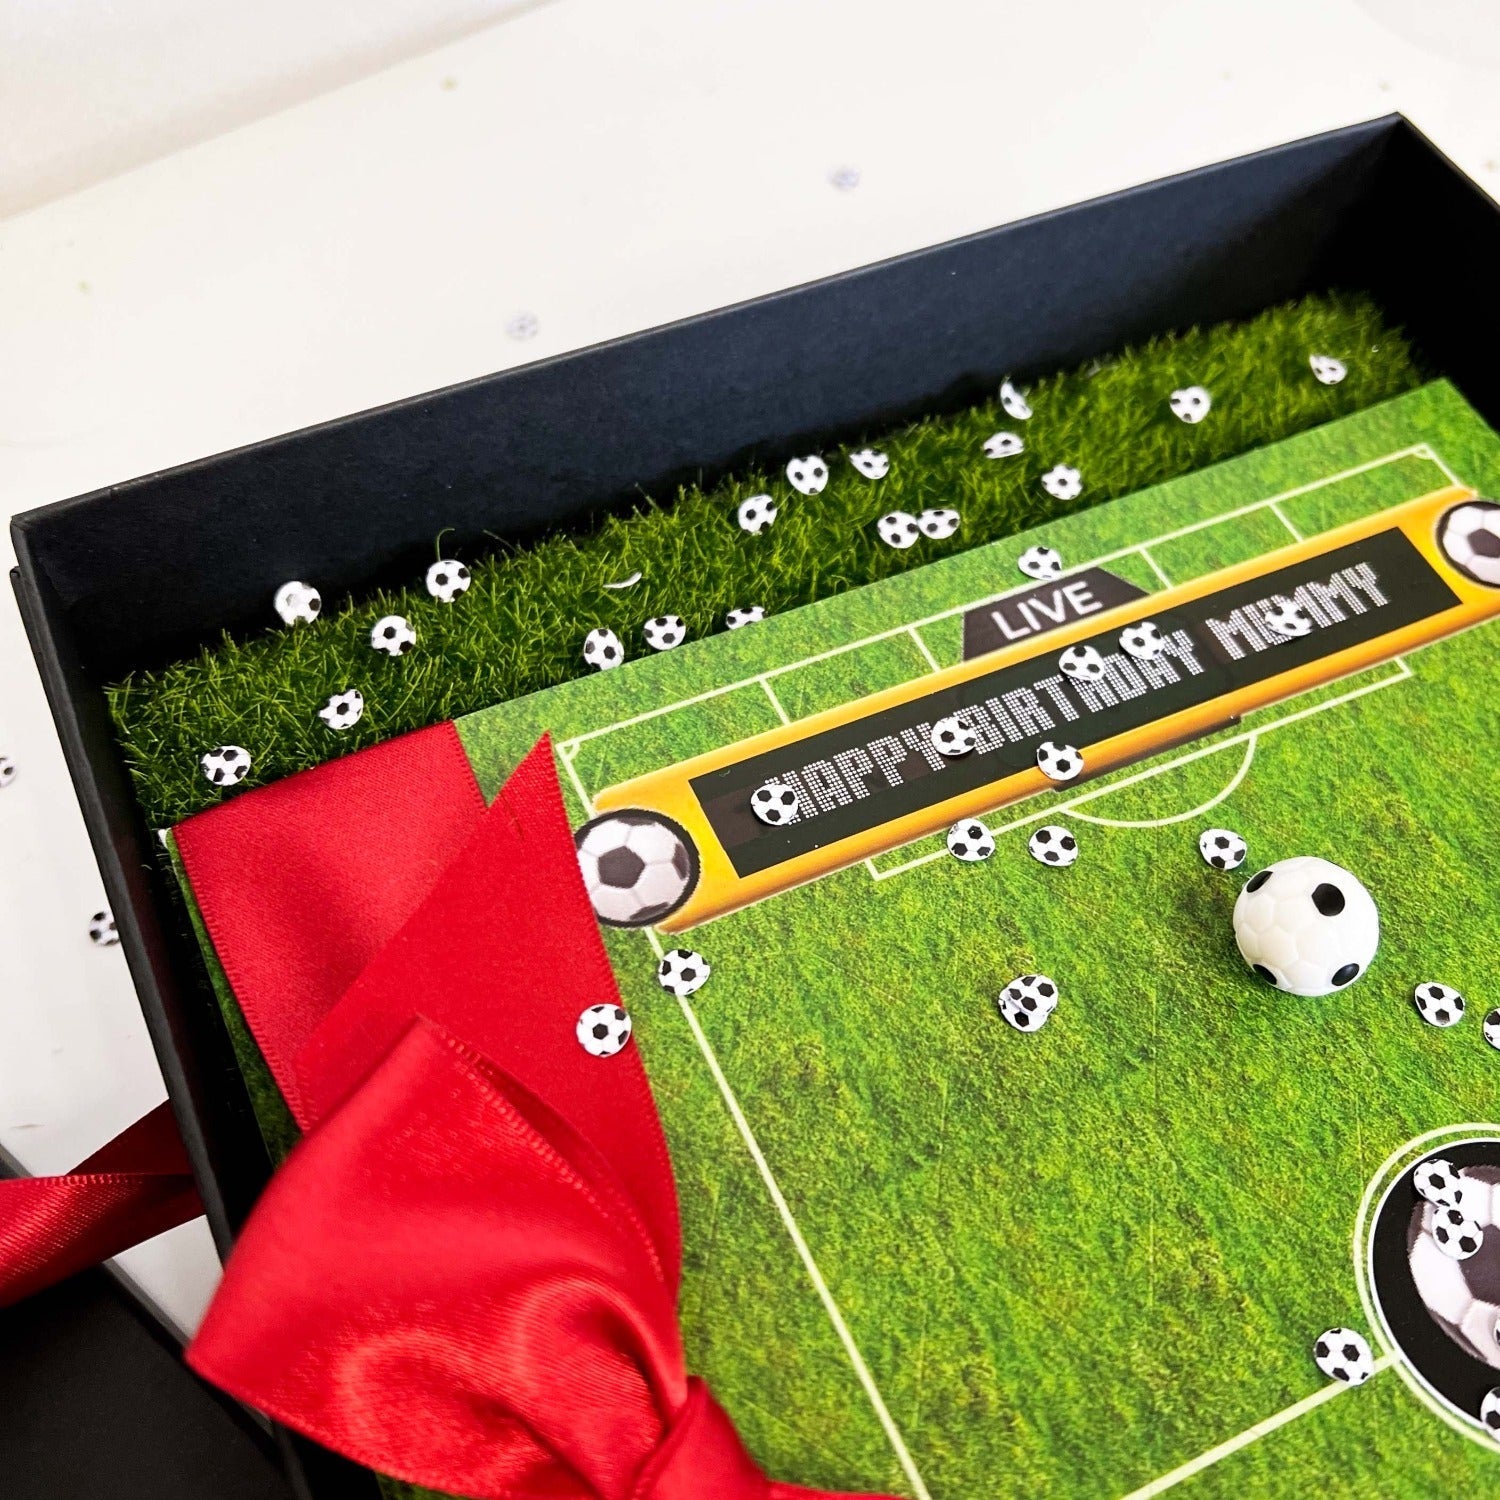 Football pitch 40th birthday card for a brother on astroturf grass scented with pitch the grassy fragrance